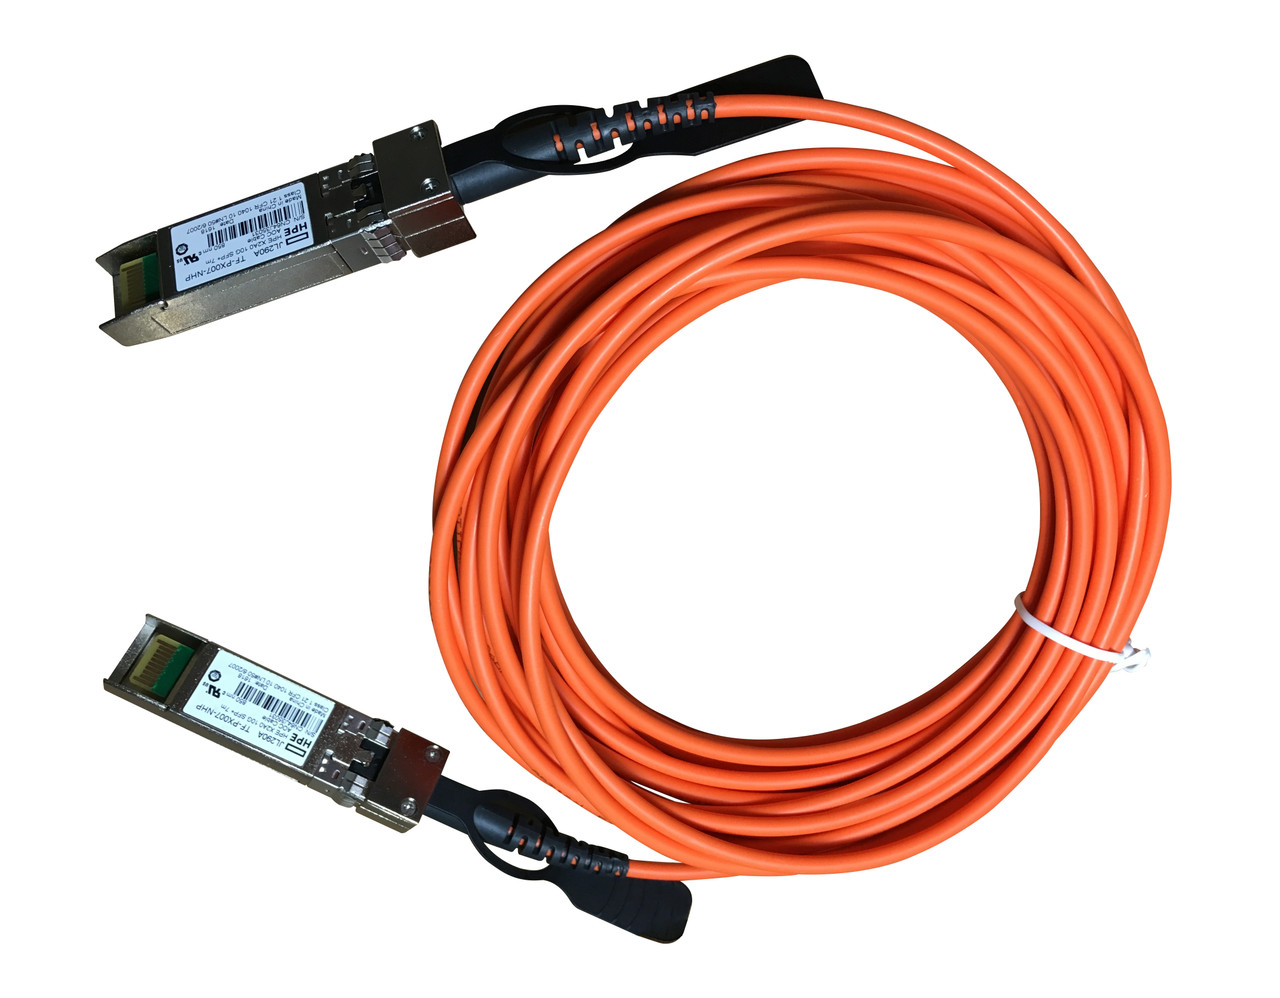 JL290A - HPE X2A0 10G SFP+ to SFP+ 7m Active Optical Cable